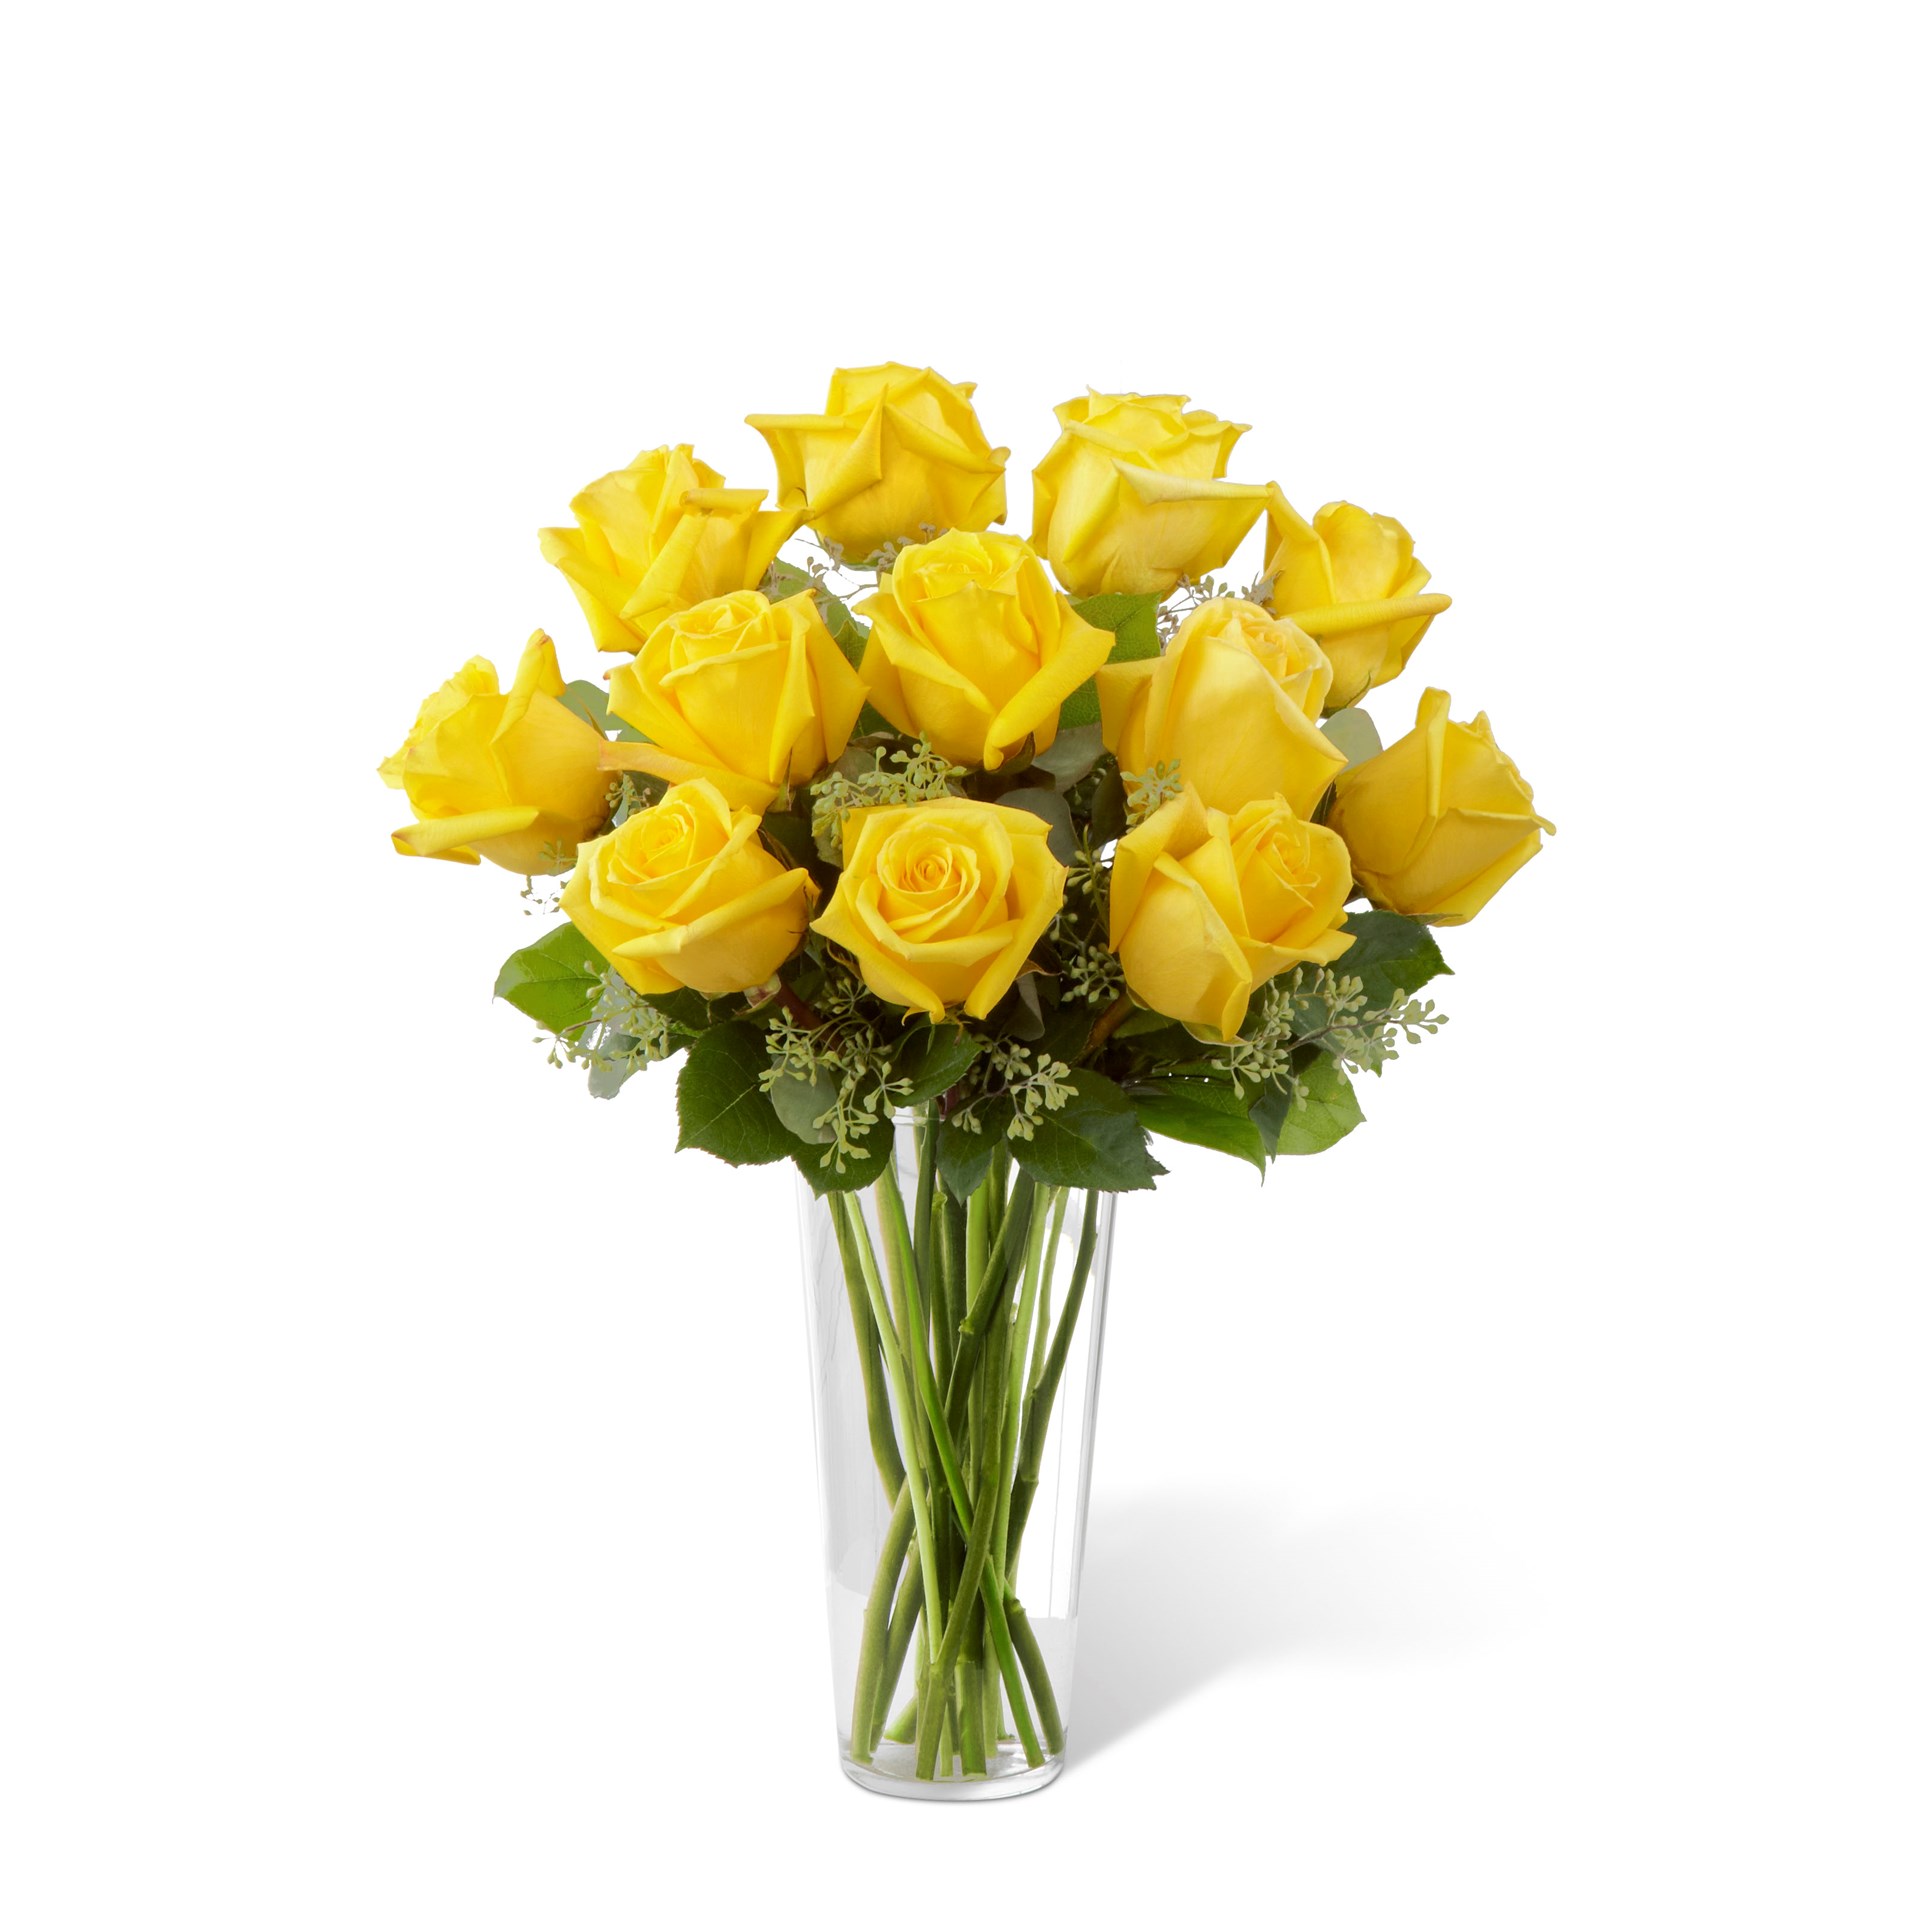 product image for The FTD Yellow Rose Bouquet